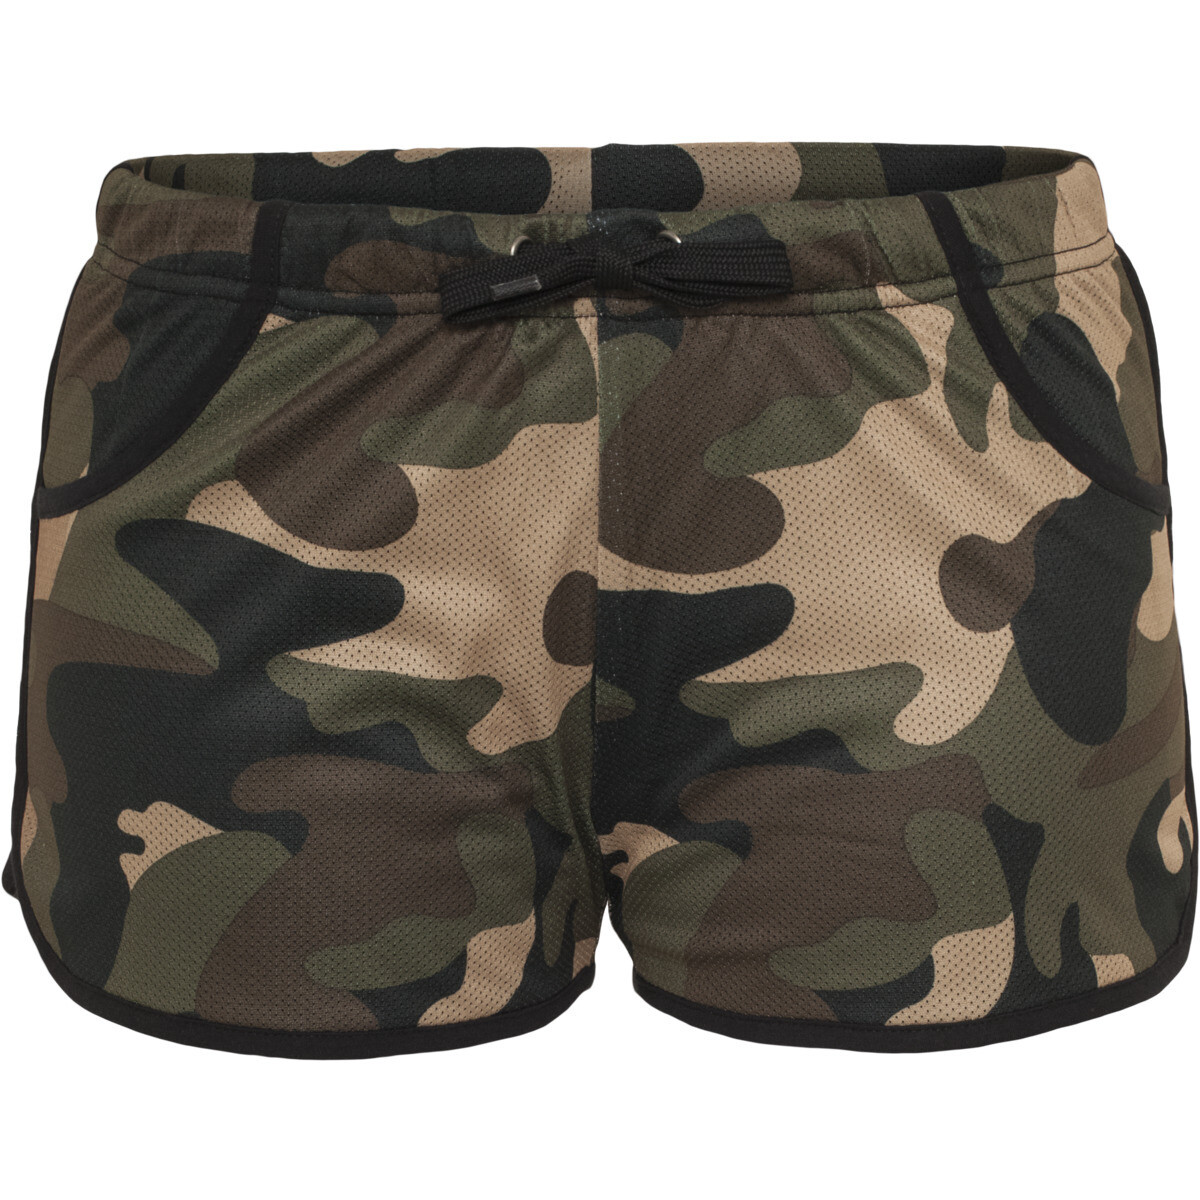 Mesh Lined Jersey Hotpants Military